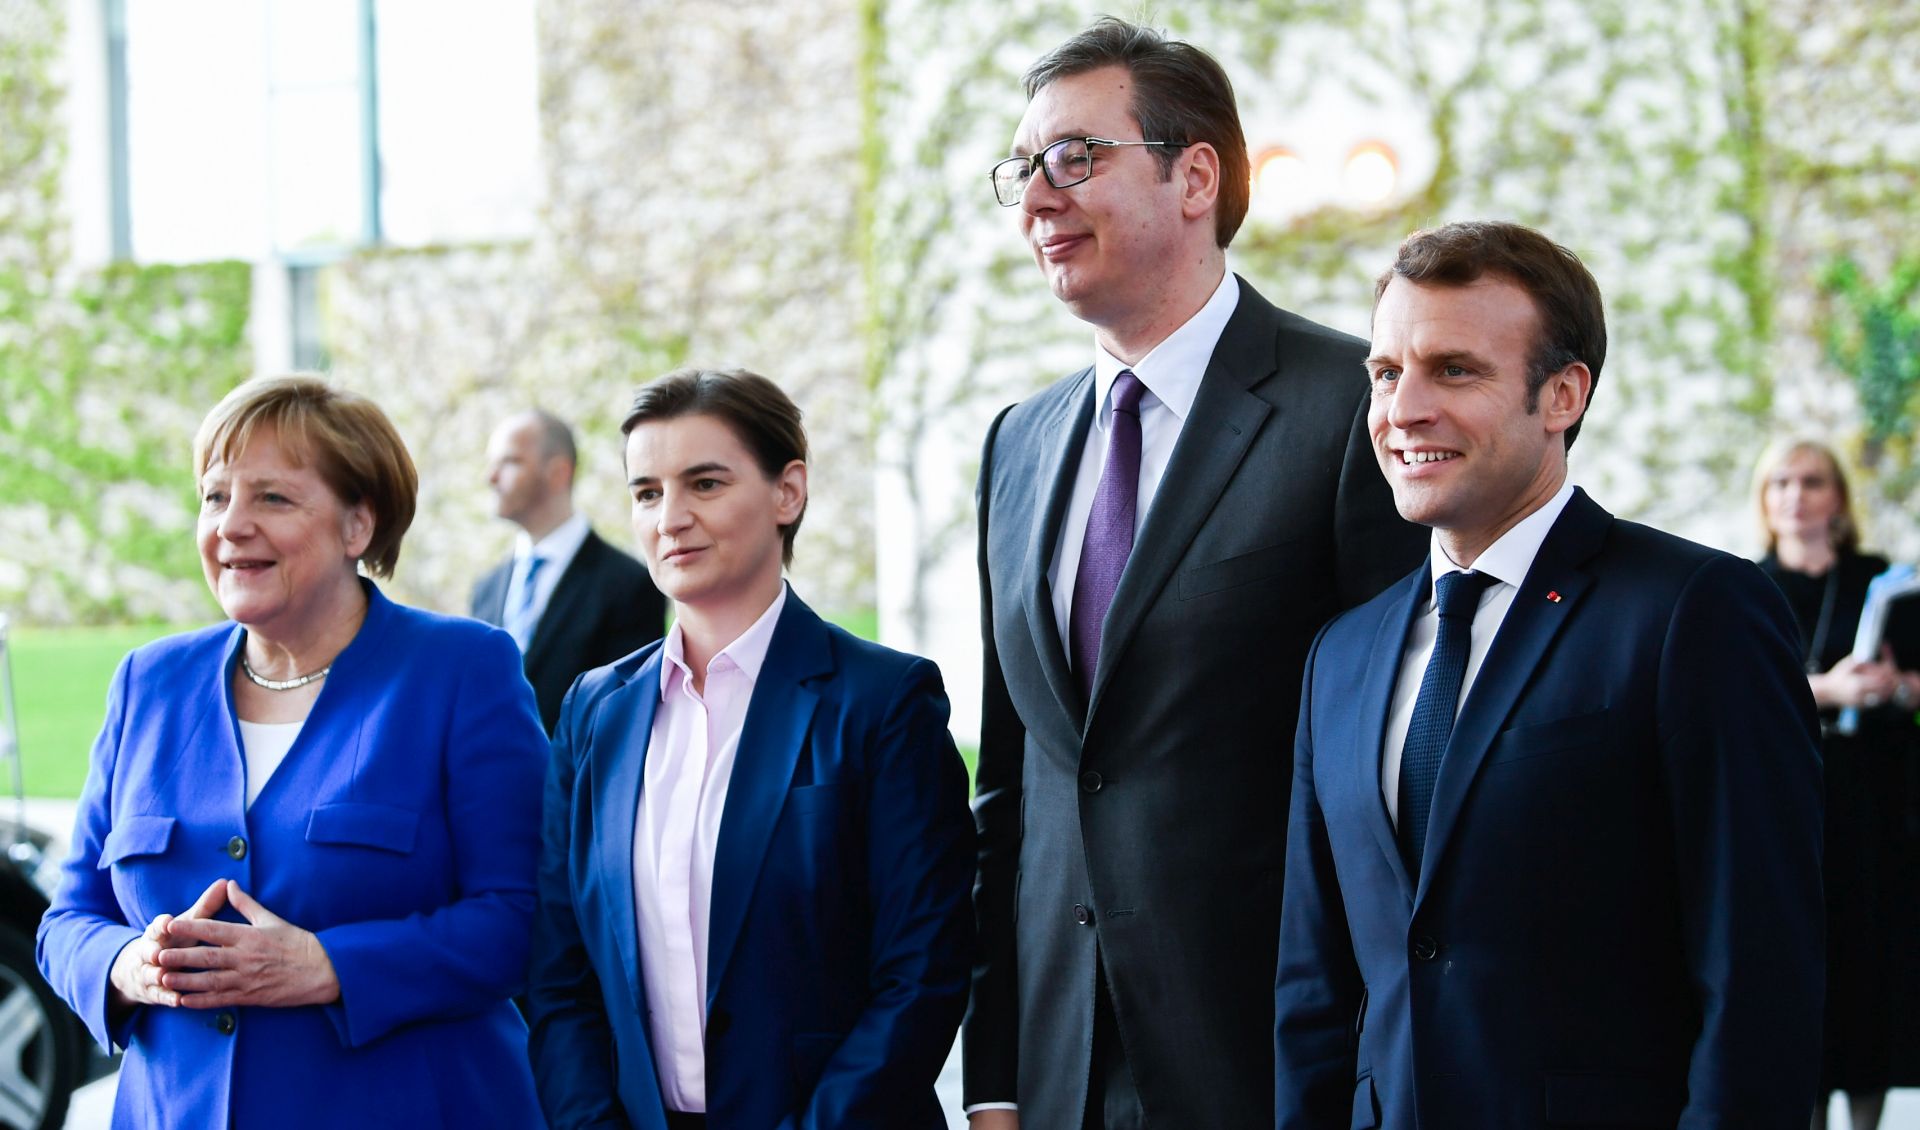 epa07536533 (L-R) German Chancellor Angela Merkel, Serbian Prime Minister Ana Brnabic, Serbian President Aleksandar Vucic and French President Emmanuel Macron pose for photographers during the arrivals for a 'Western Balkans Conference' at the Chancellery in Berlin, Germany, 29 April 2019. German Chancellor Angela Merkel and French President Emmanuel Macron are hosting a meeting of European Union officials and Western Balkan leaders to restart talks between Serbia and Kosovo.  EPA/FILIP SINGER